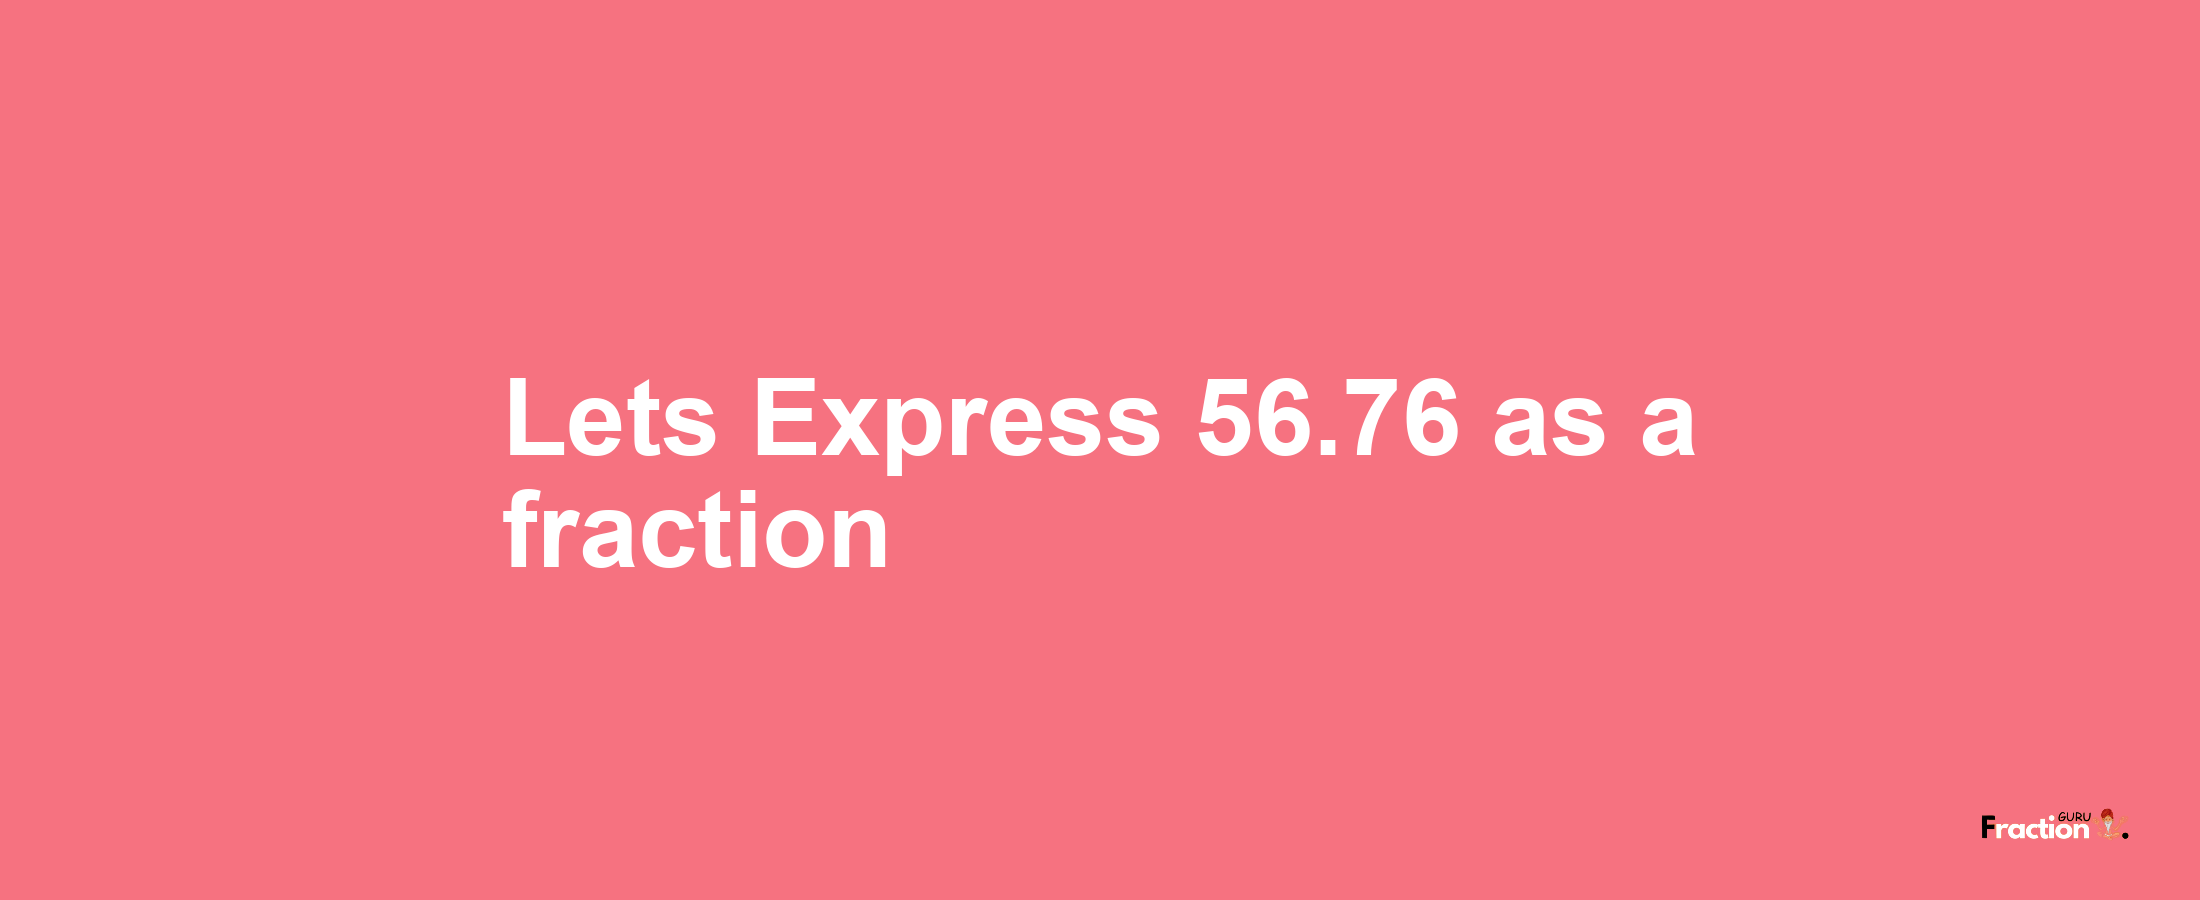 Lets Express 56.76 as afraction